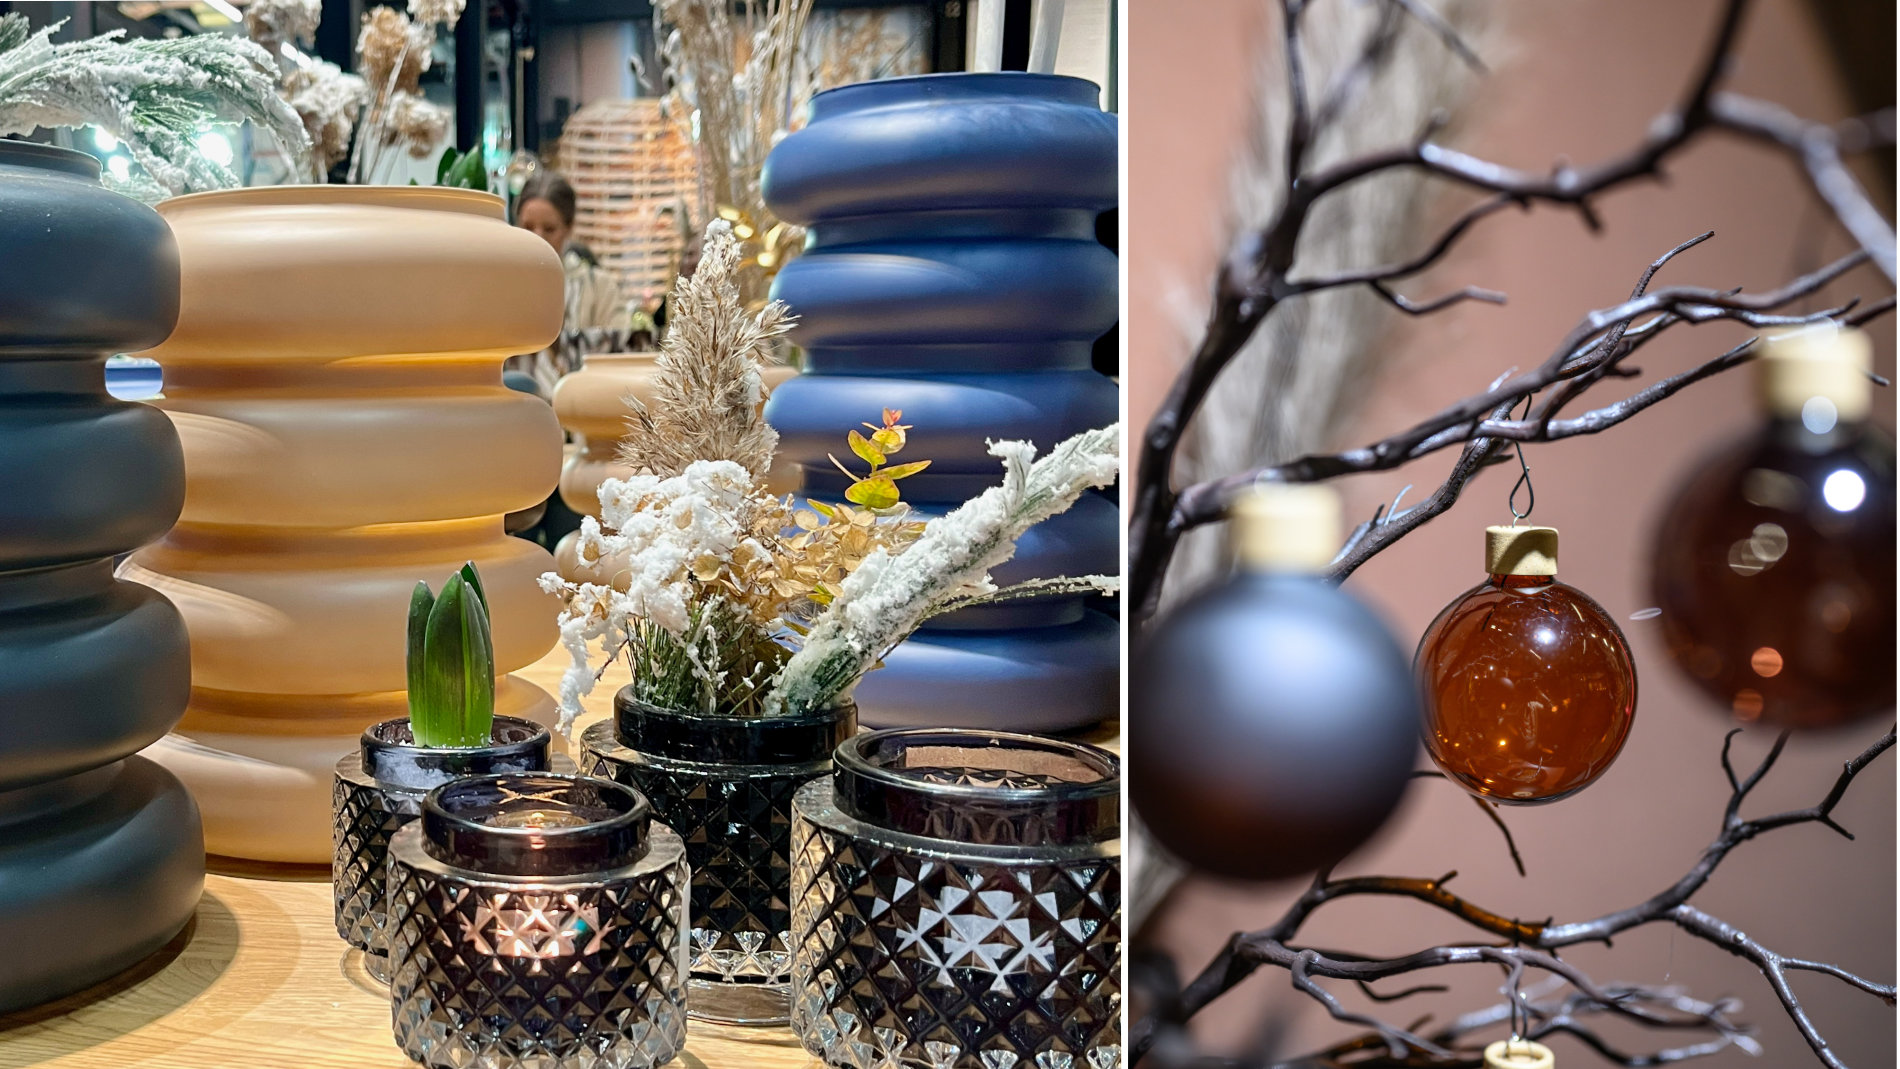 Kerstin Männer: Jodeco vases and baubles from Inge's Christmas Decor